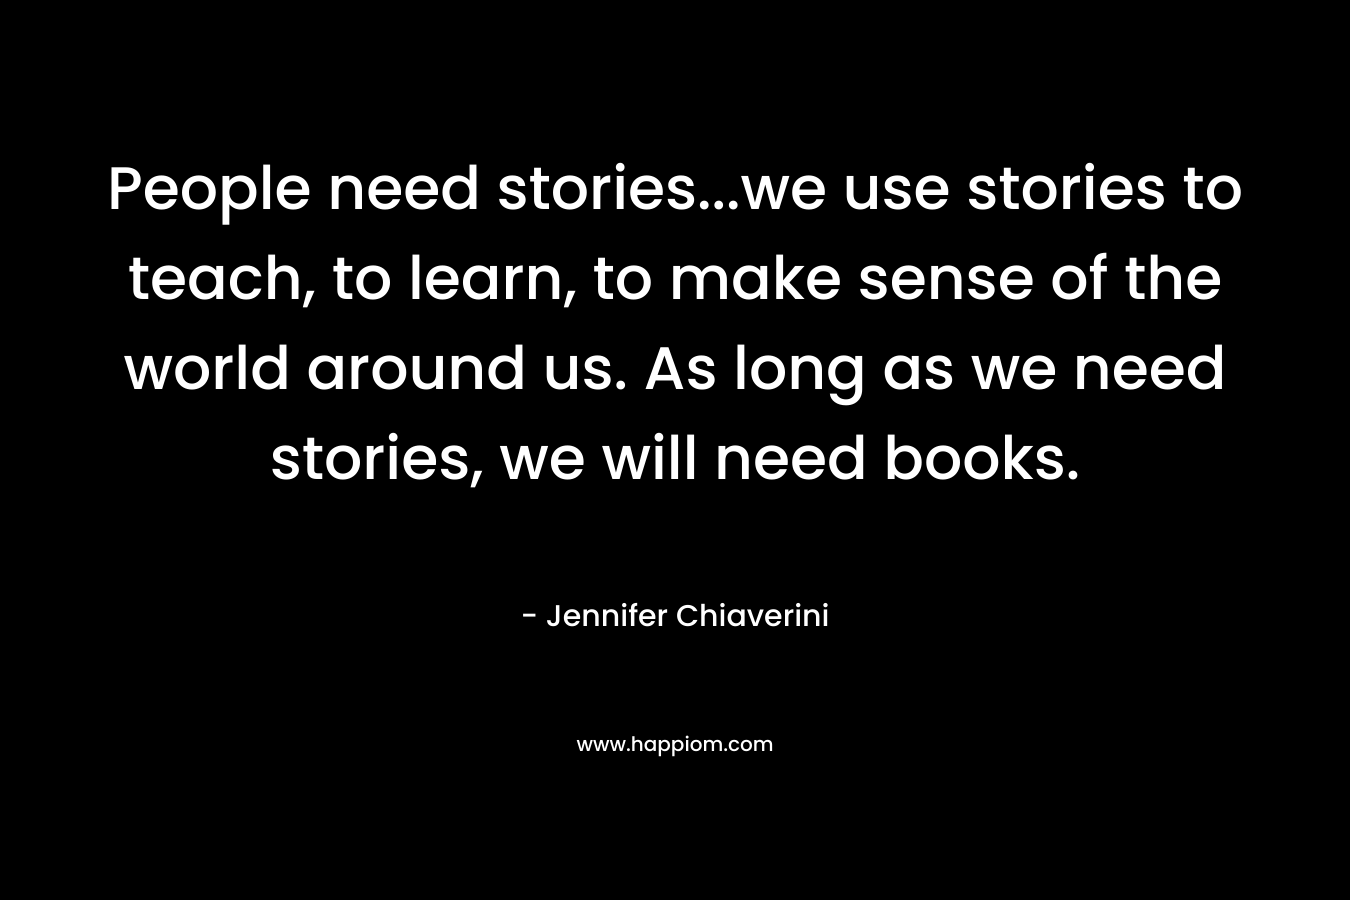 People need stories...we use stories to teach, to learn, to make sense of the world around us. As long as we need stories, we will need books.